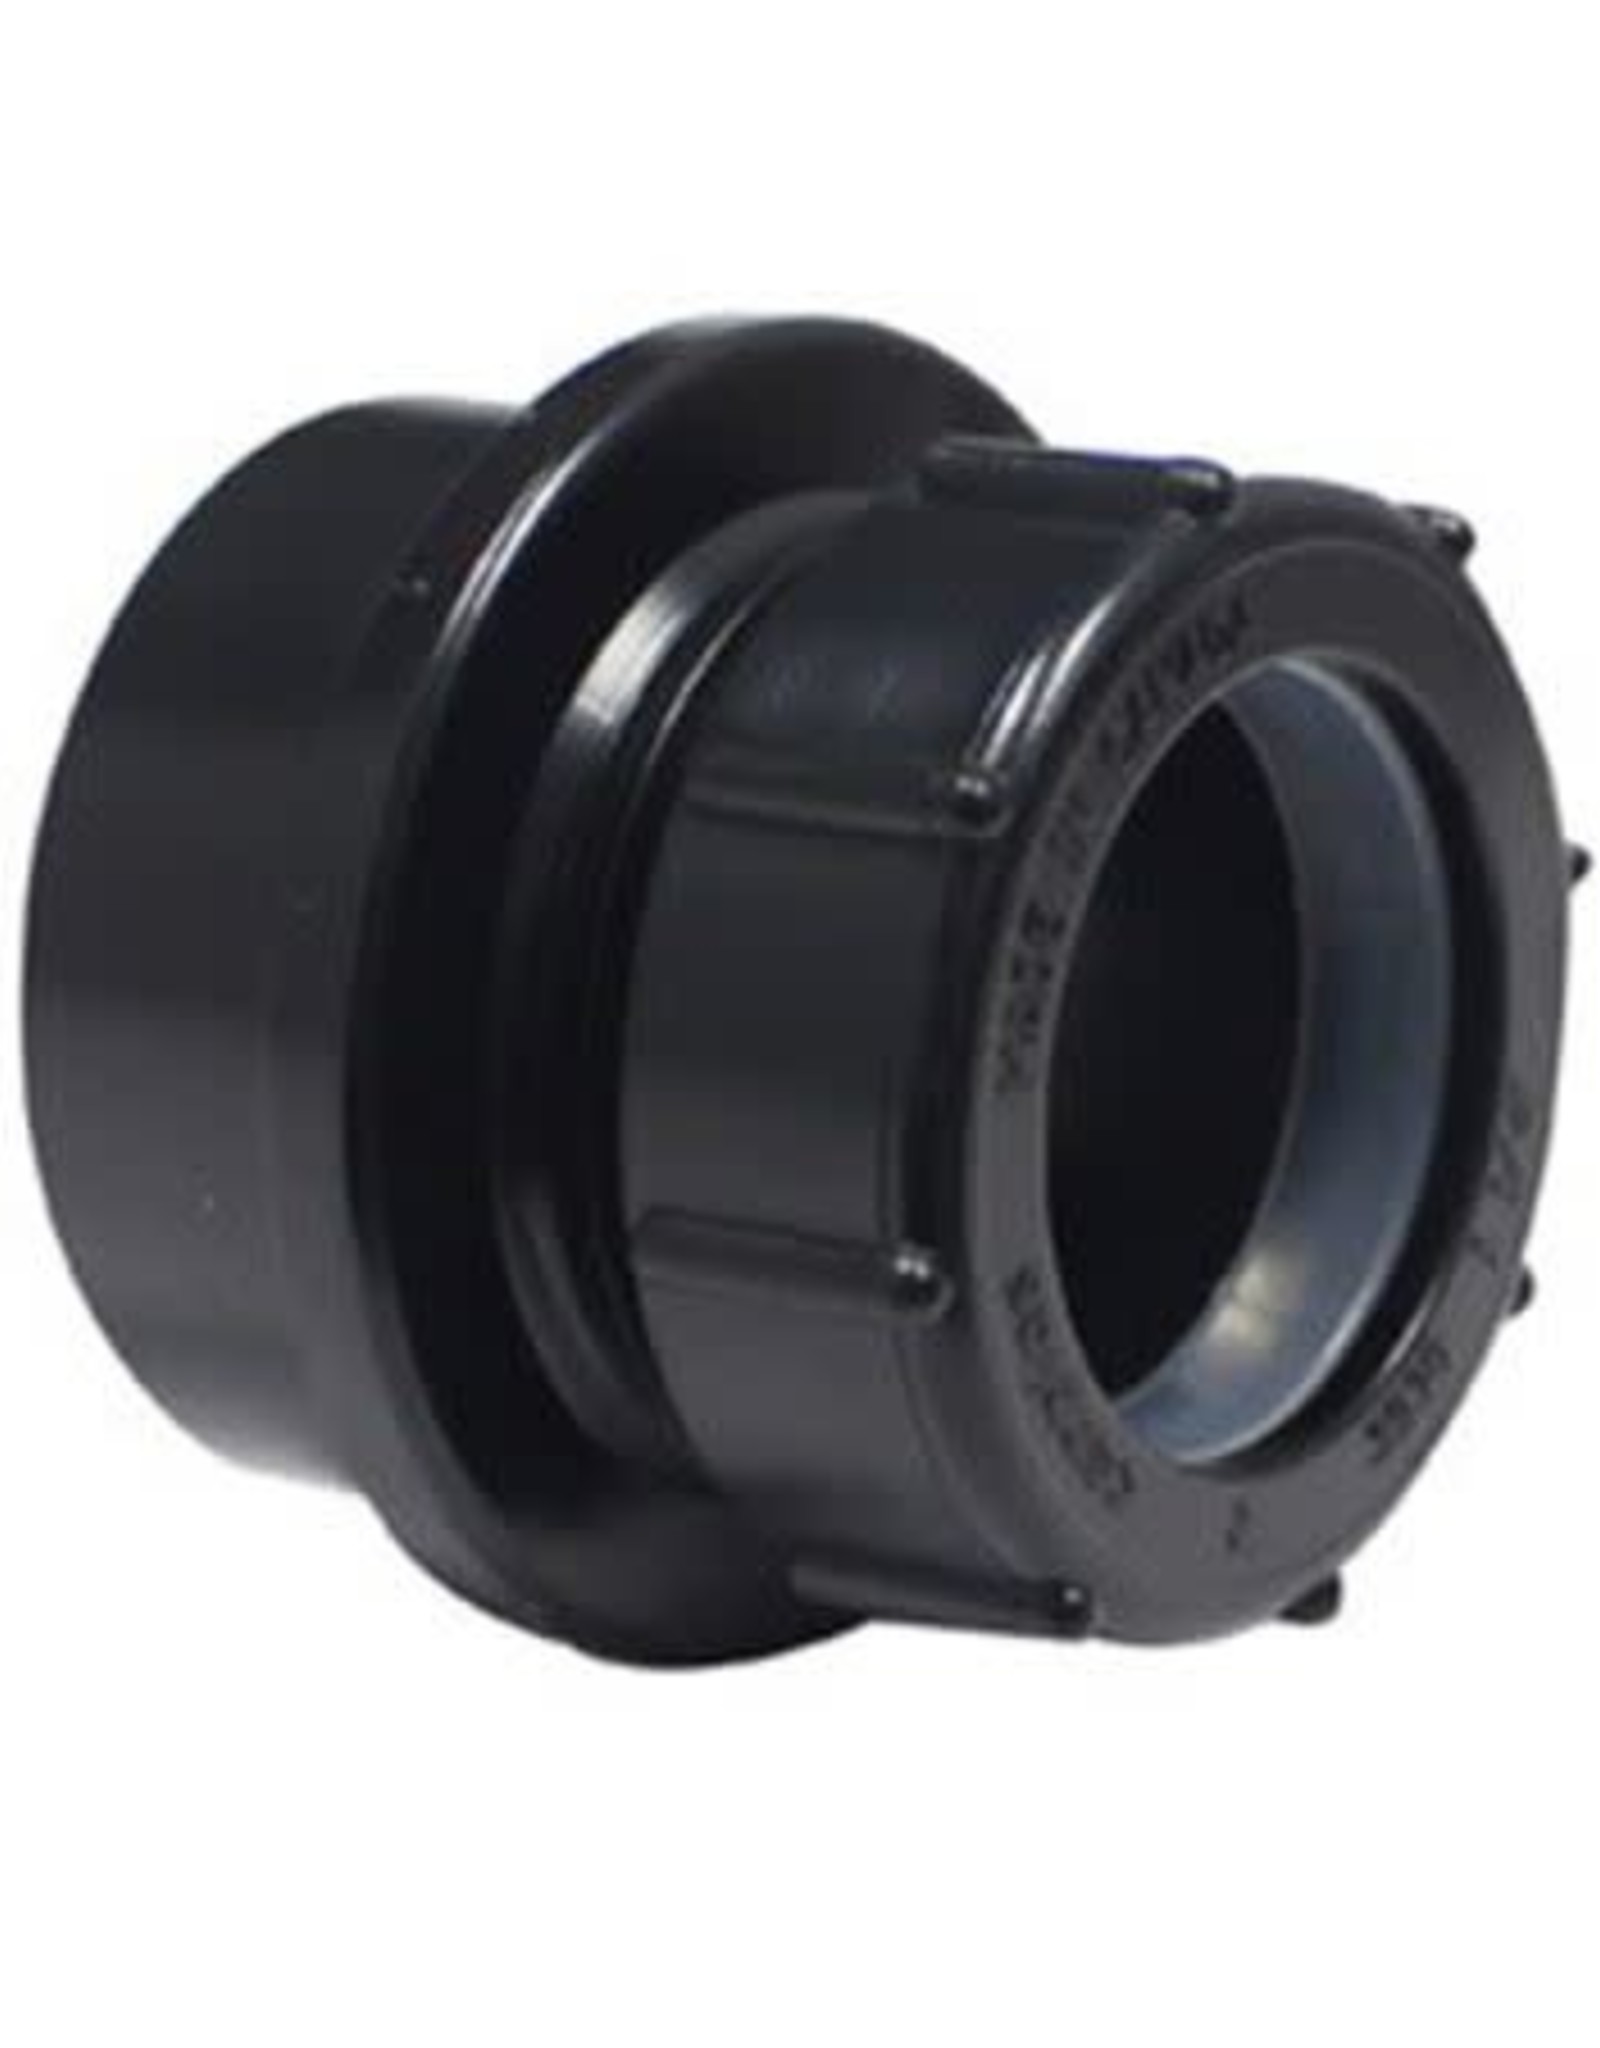 1-1/2" ABS x 1-1/4" Male Trap Adapter